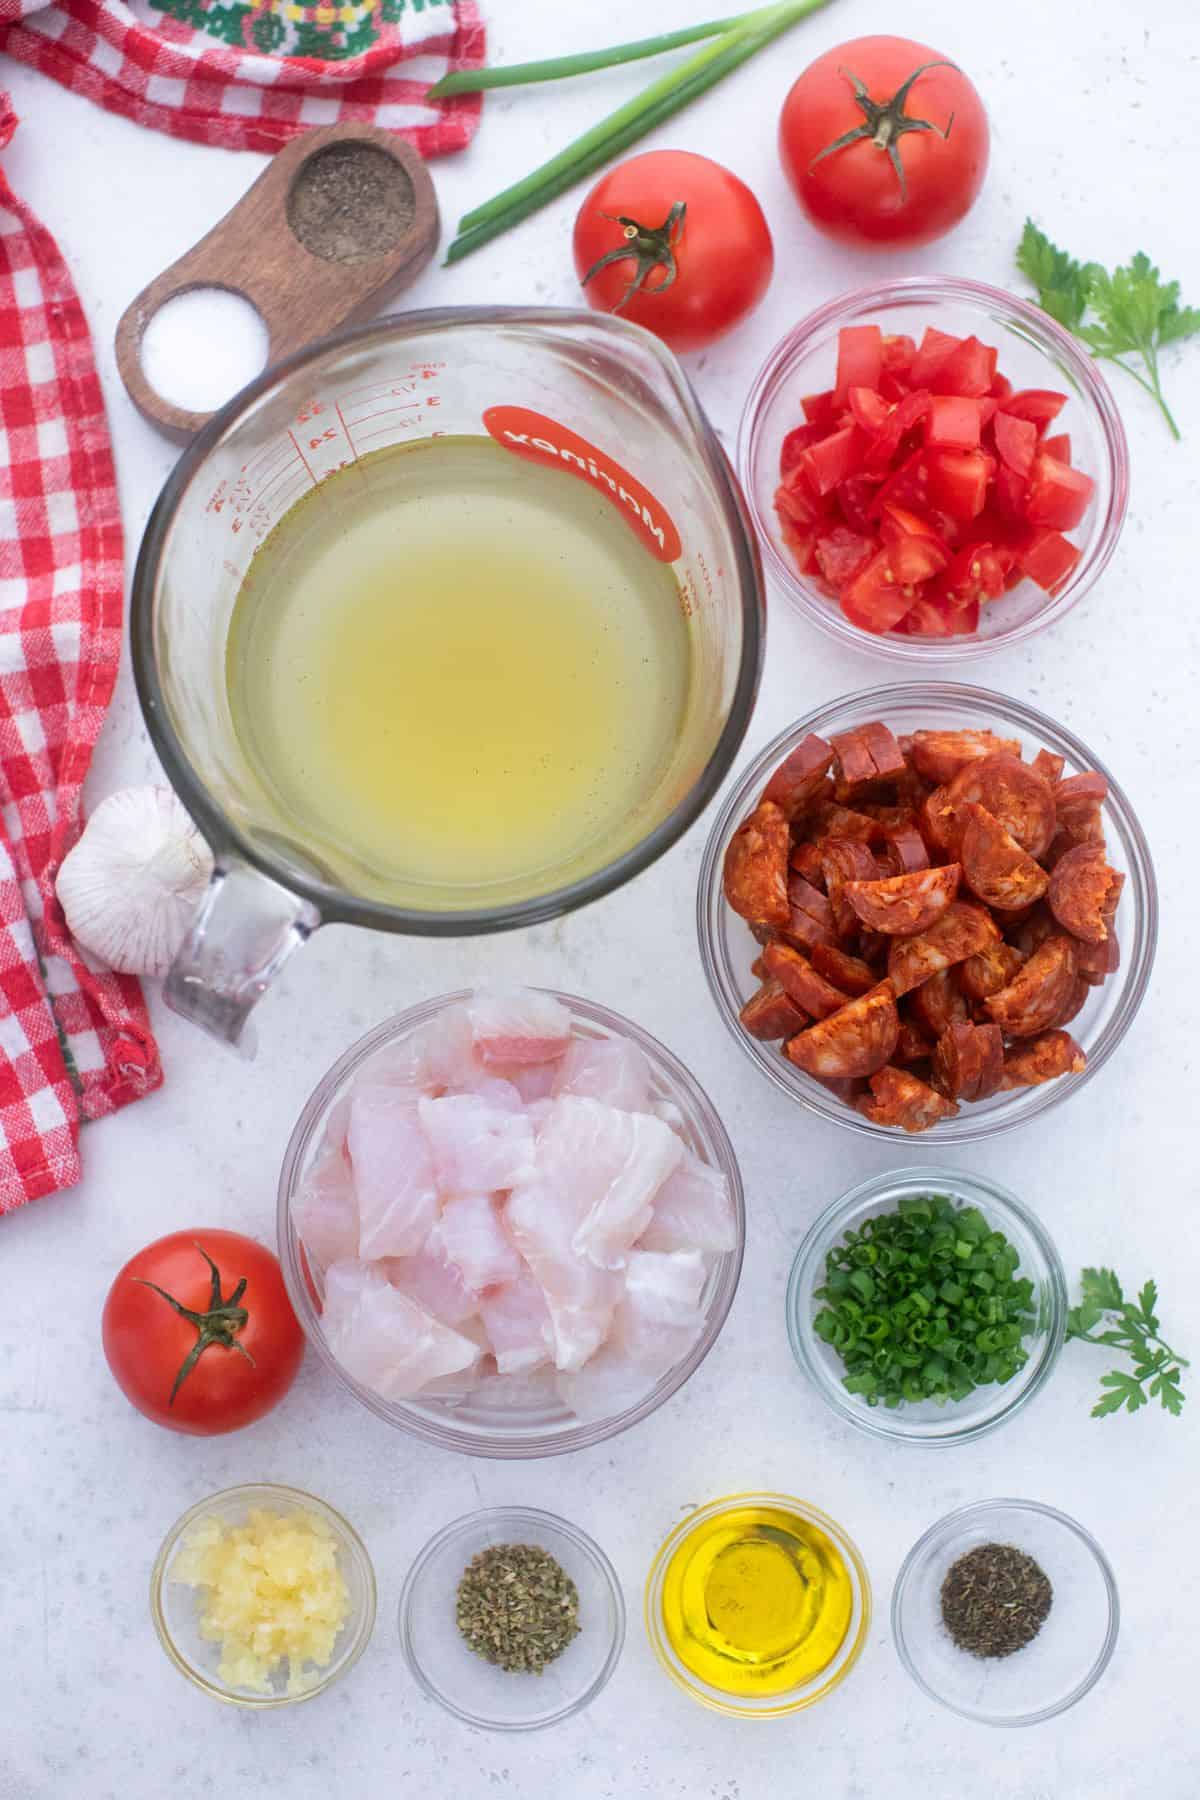 A bowl of ingredients for a chicken salad with tomatoes and herbs.